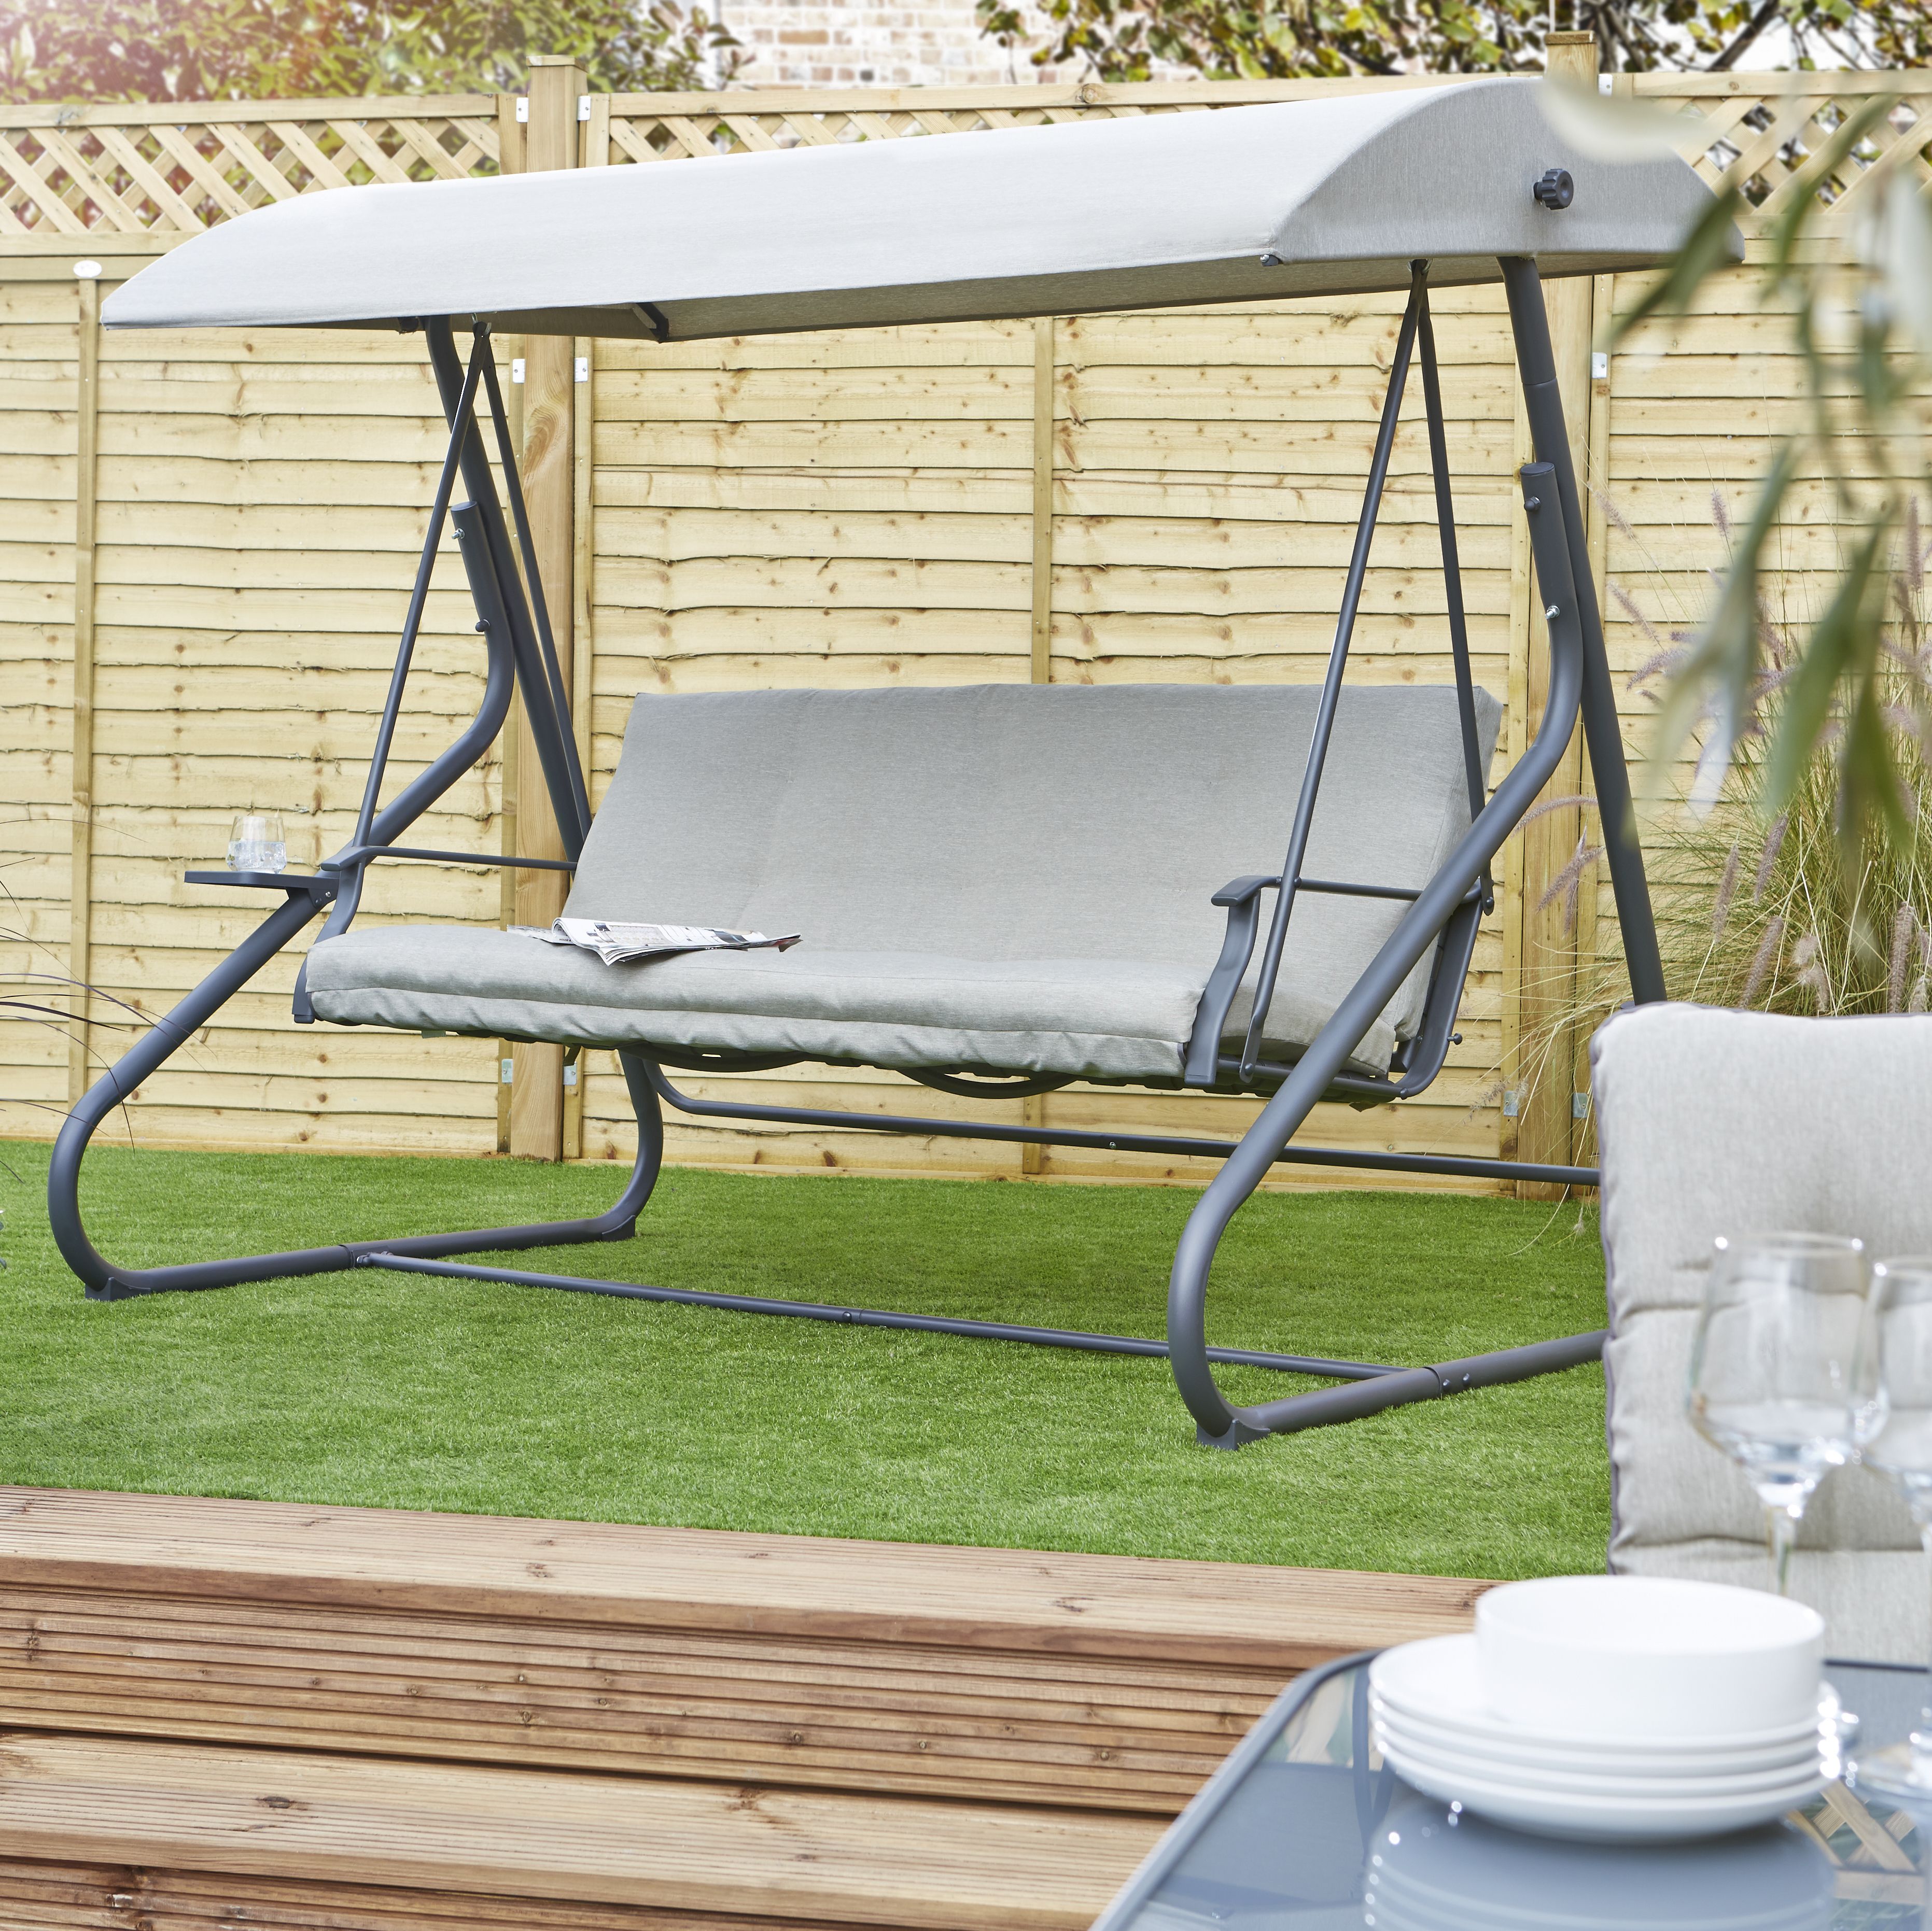 Buyer's guide to garden furniture Help &amp; Ideas DIY at B&amp;Q